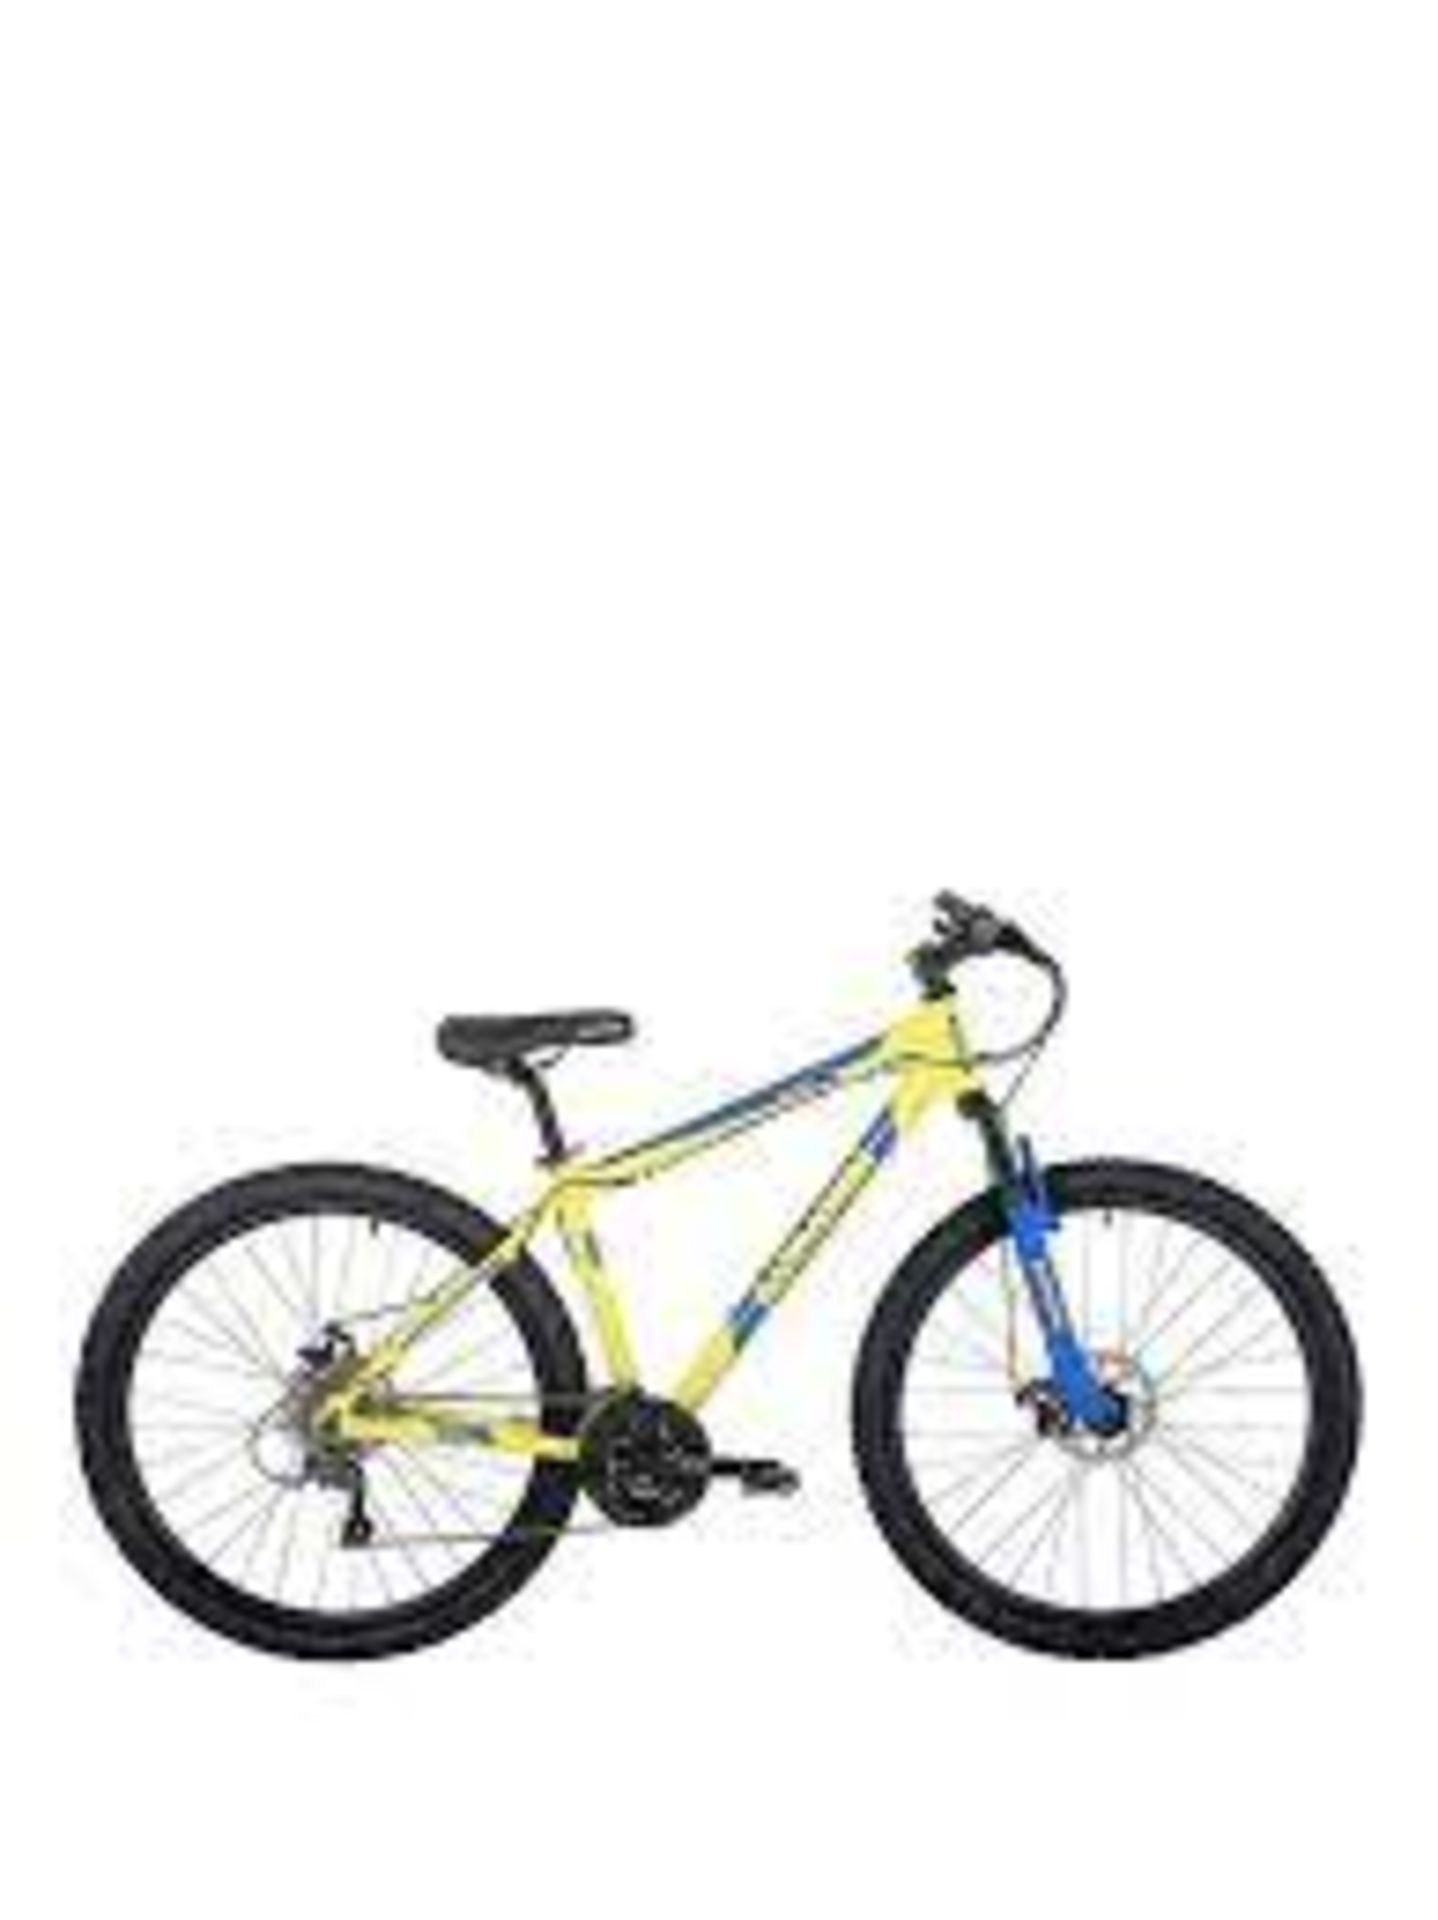 New Boxed Barracuda Draco 4 19 Inch Hardtail 24 Speed 27.5 Inch Yellow Blue Disc brakes. RRP £499.